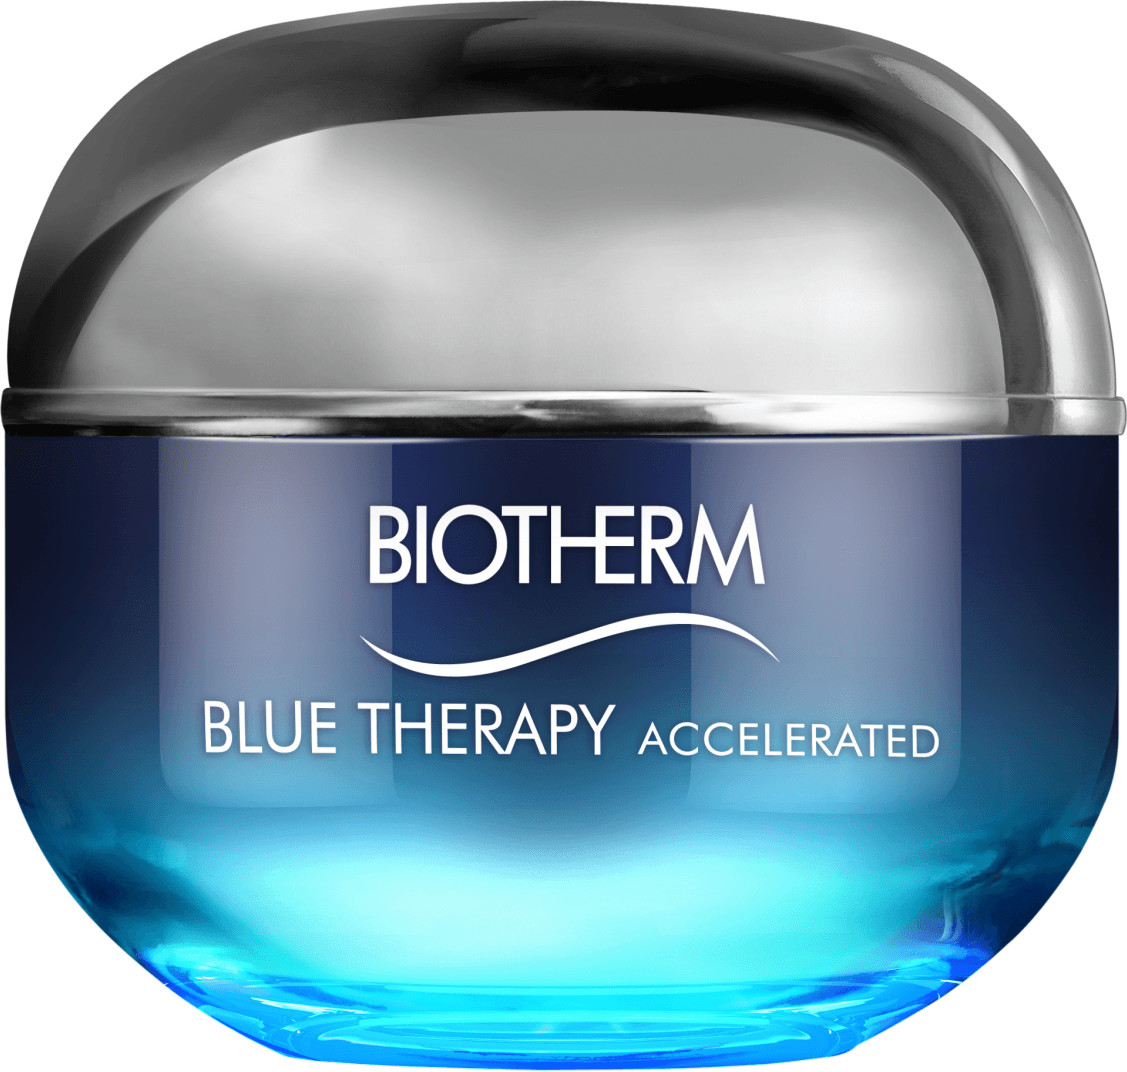 Biotherm Blue Therapy Accelerated Cream (50ml)